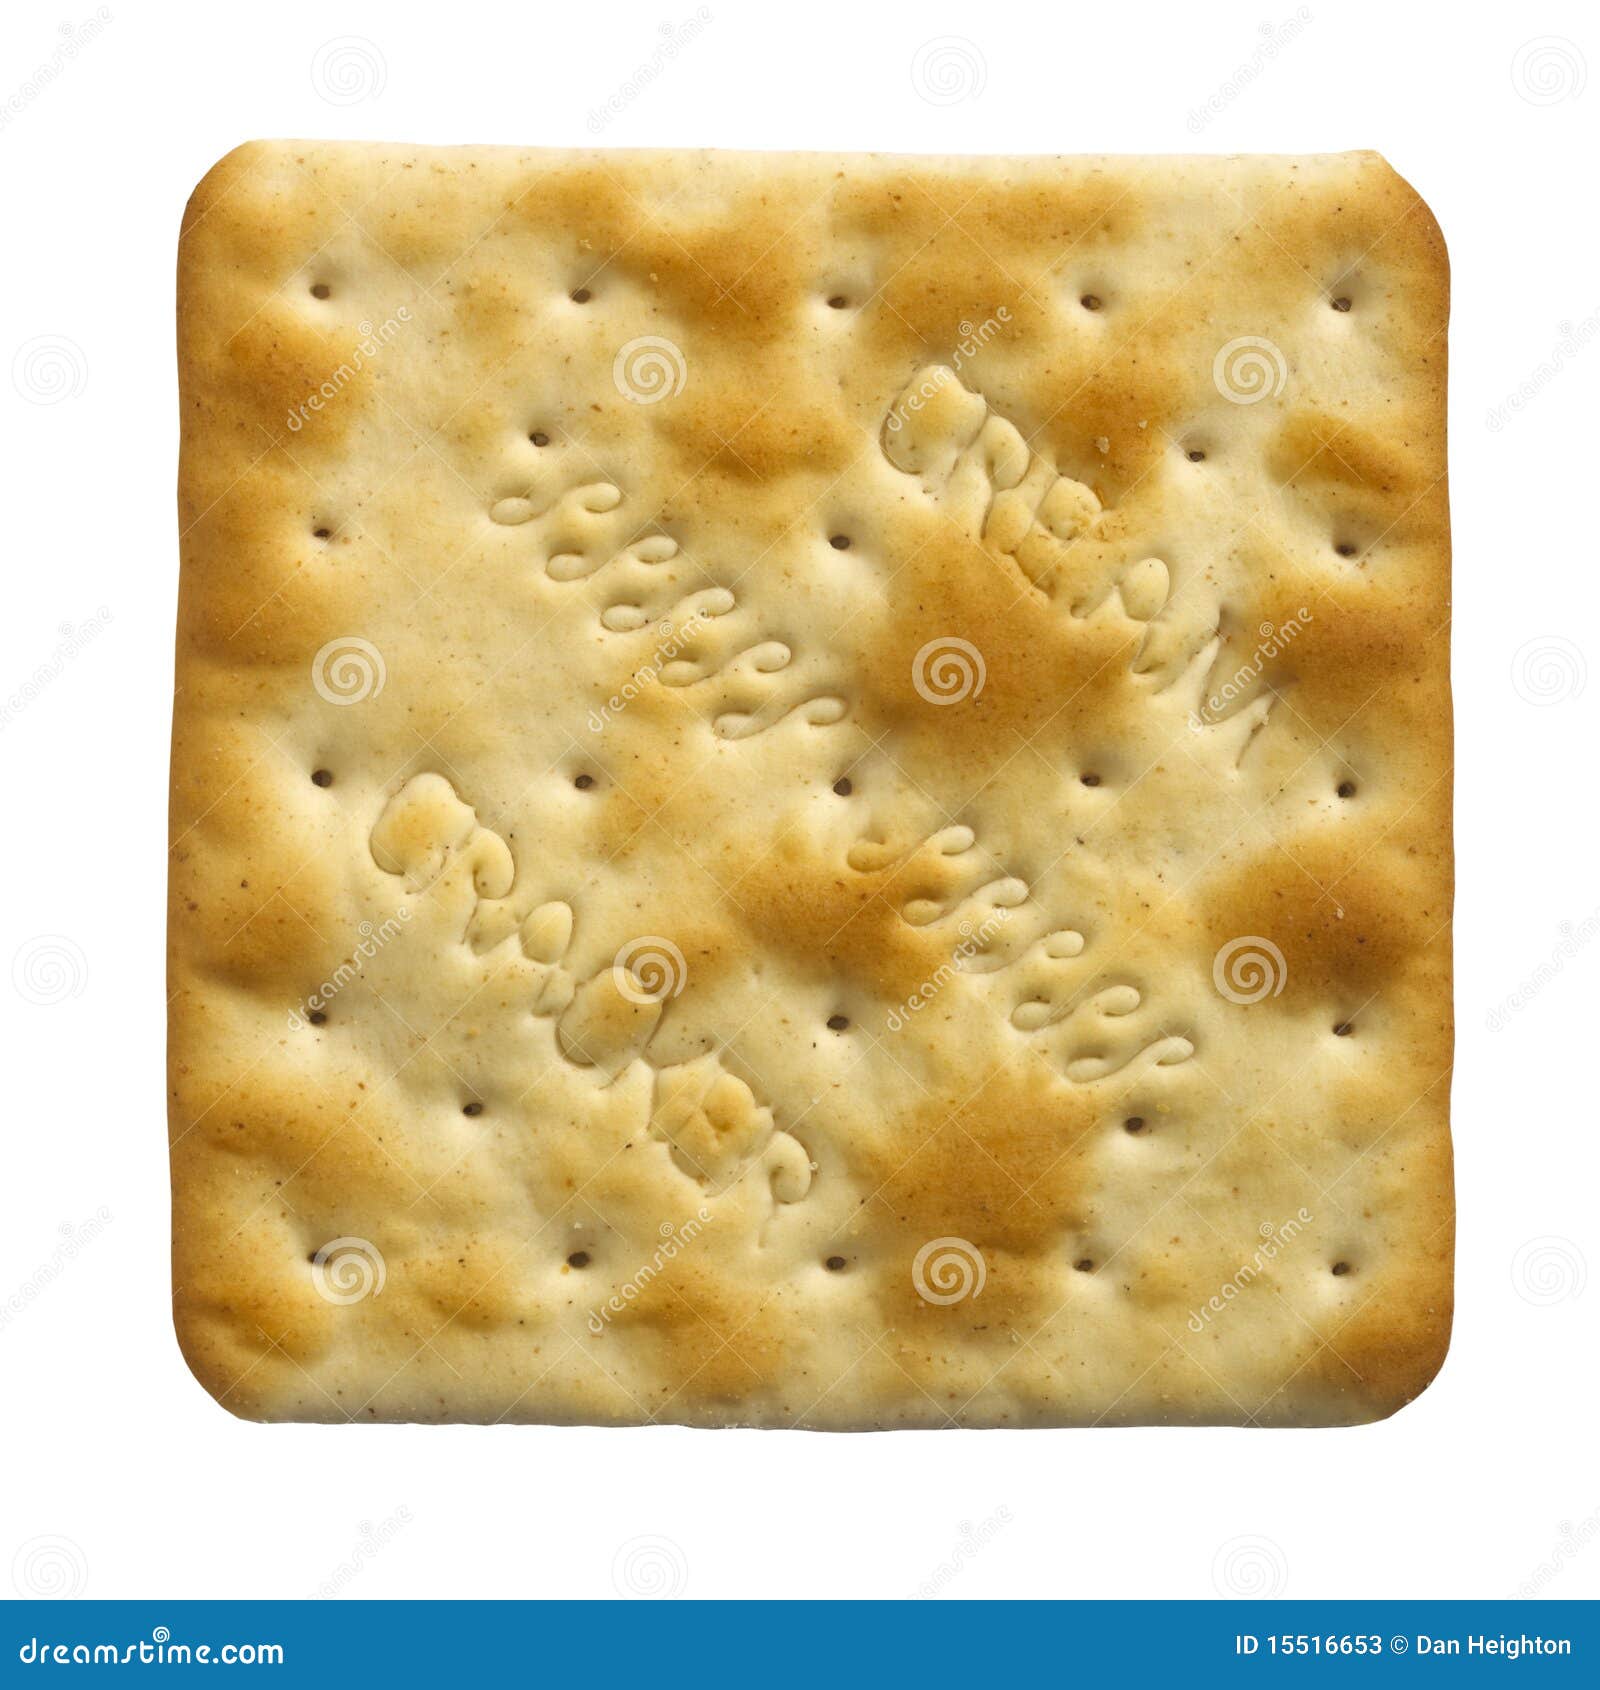 Single Cream Cracker Biscuit On White Background Stock Image ...